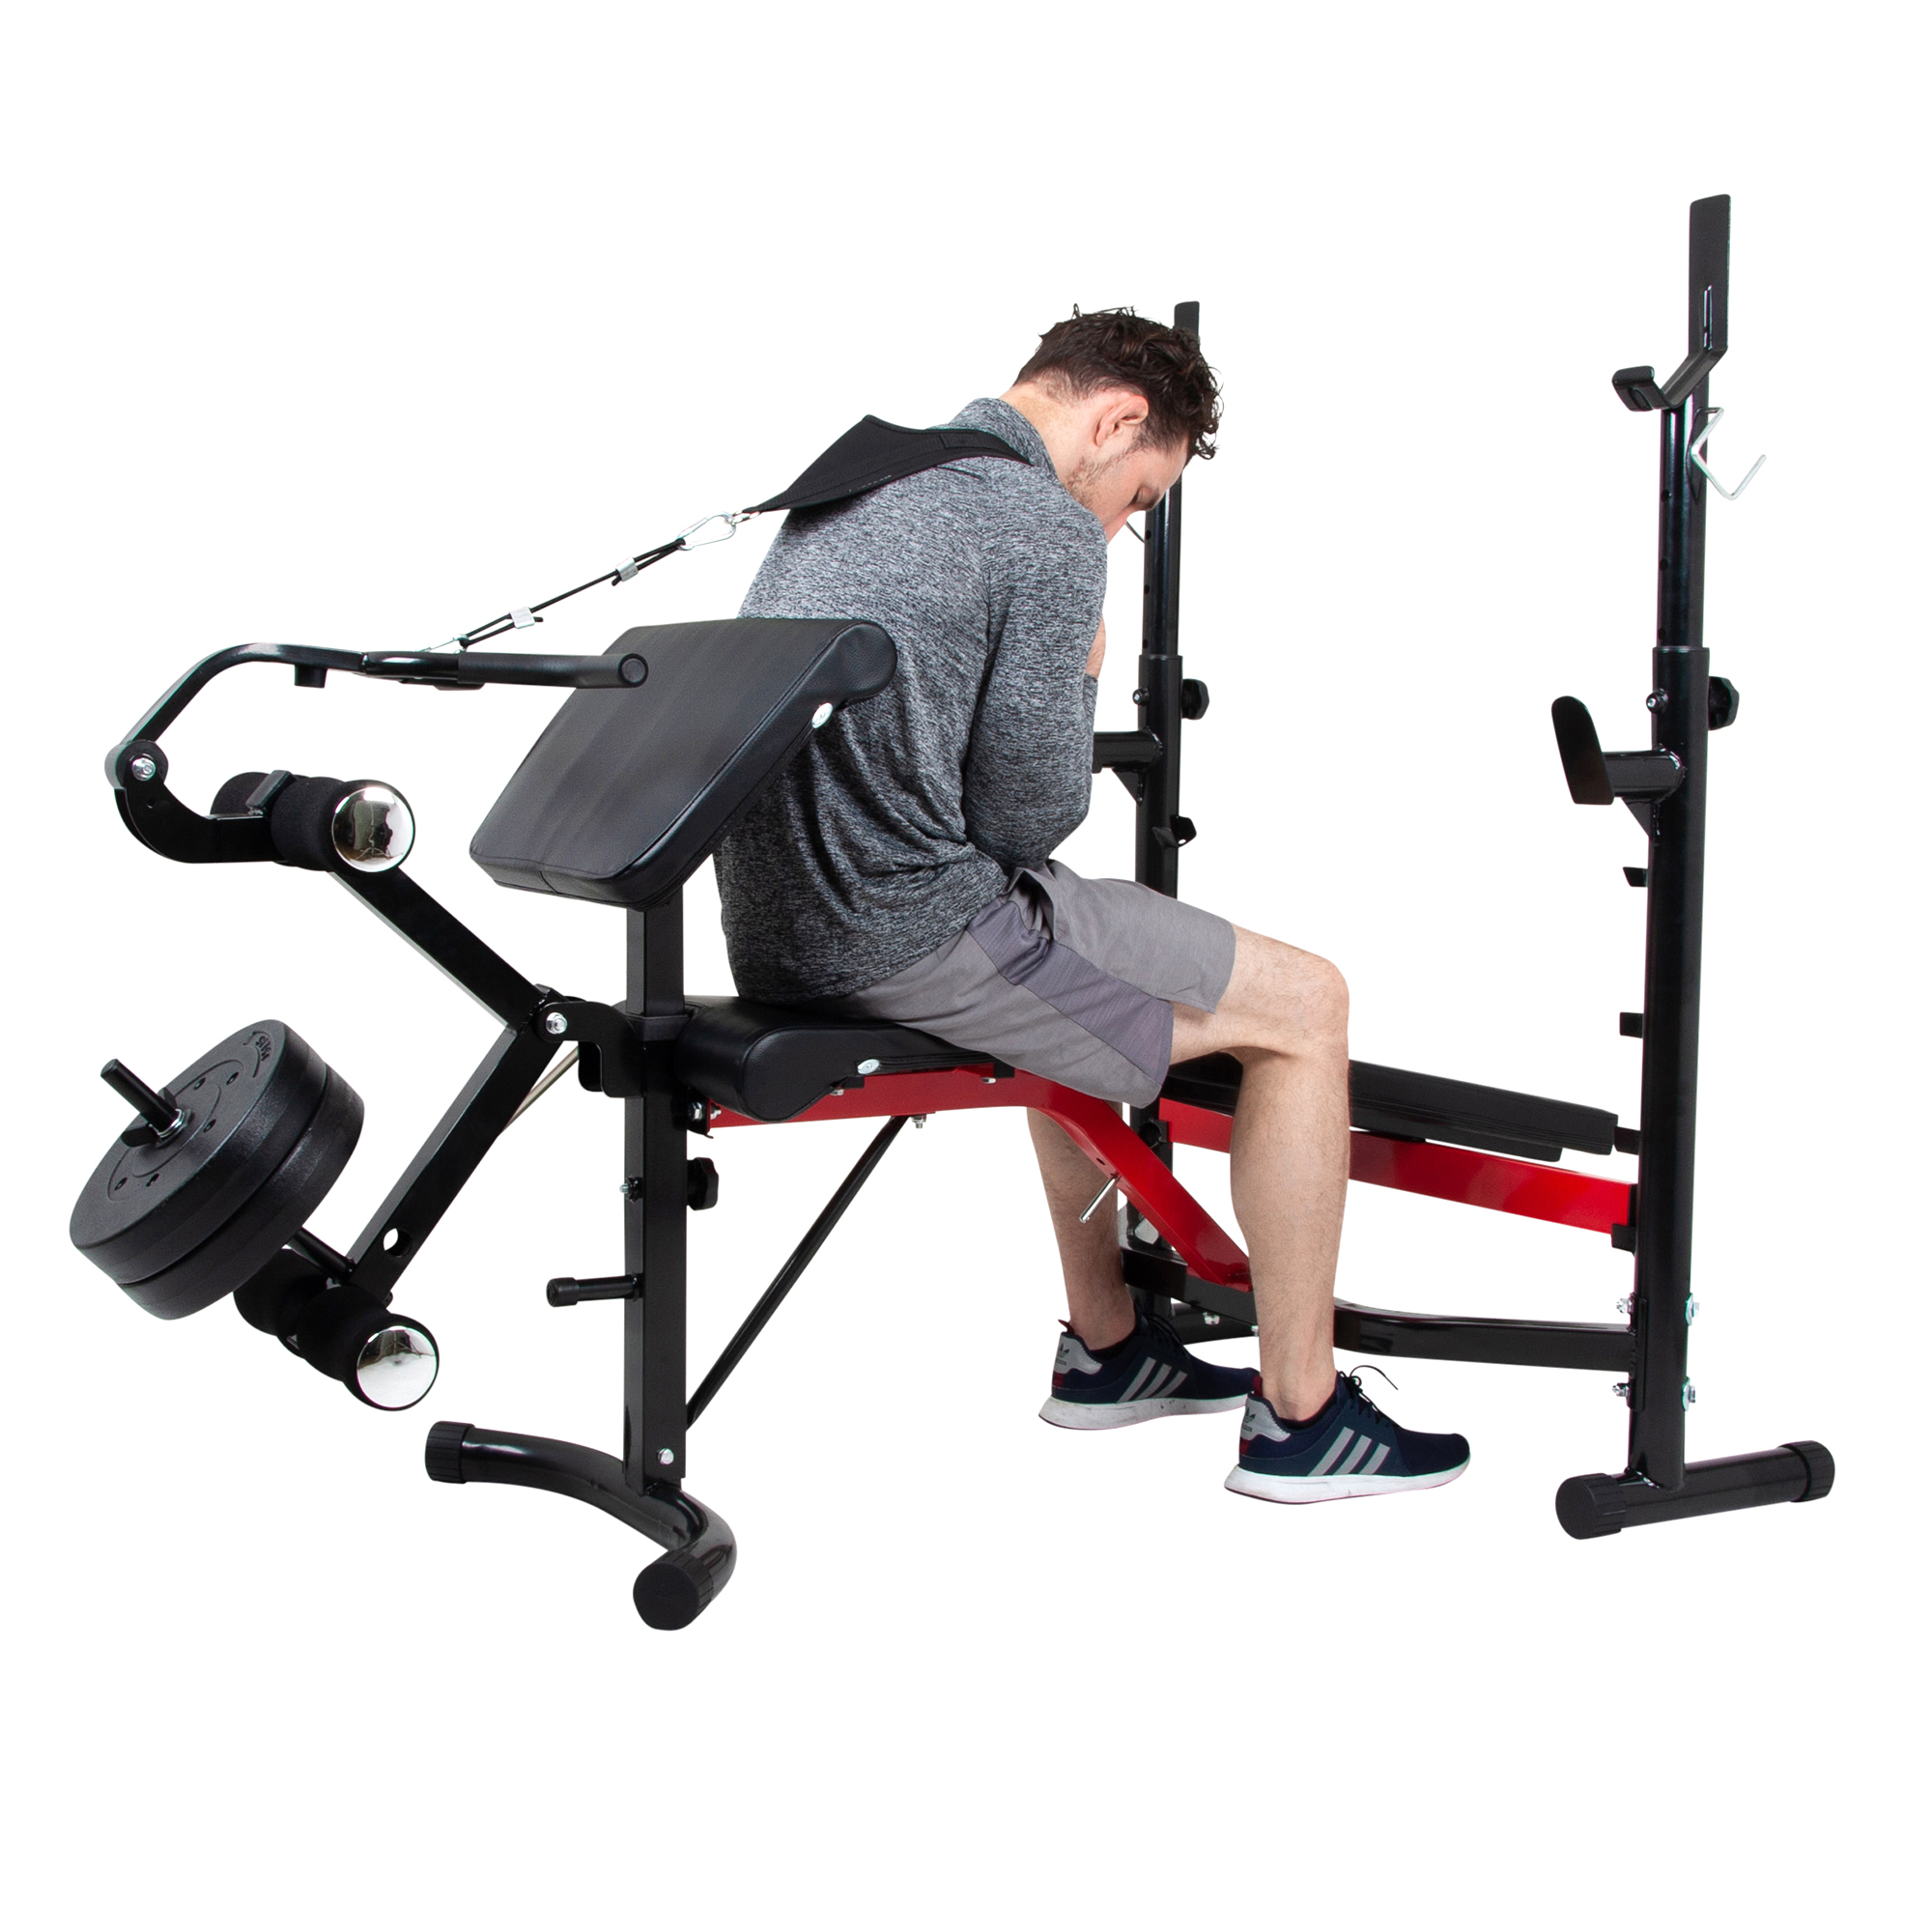 Body Champ BCB5268 Olympic Weight Bench with Arm Curl and Curl Bar Attachment, 300 Lbs. Weight Limit - image 5 of 10